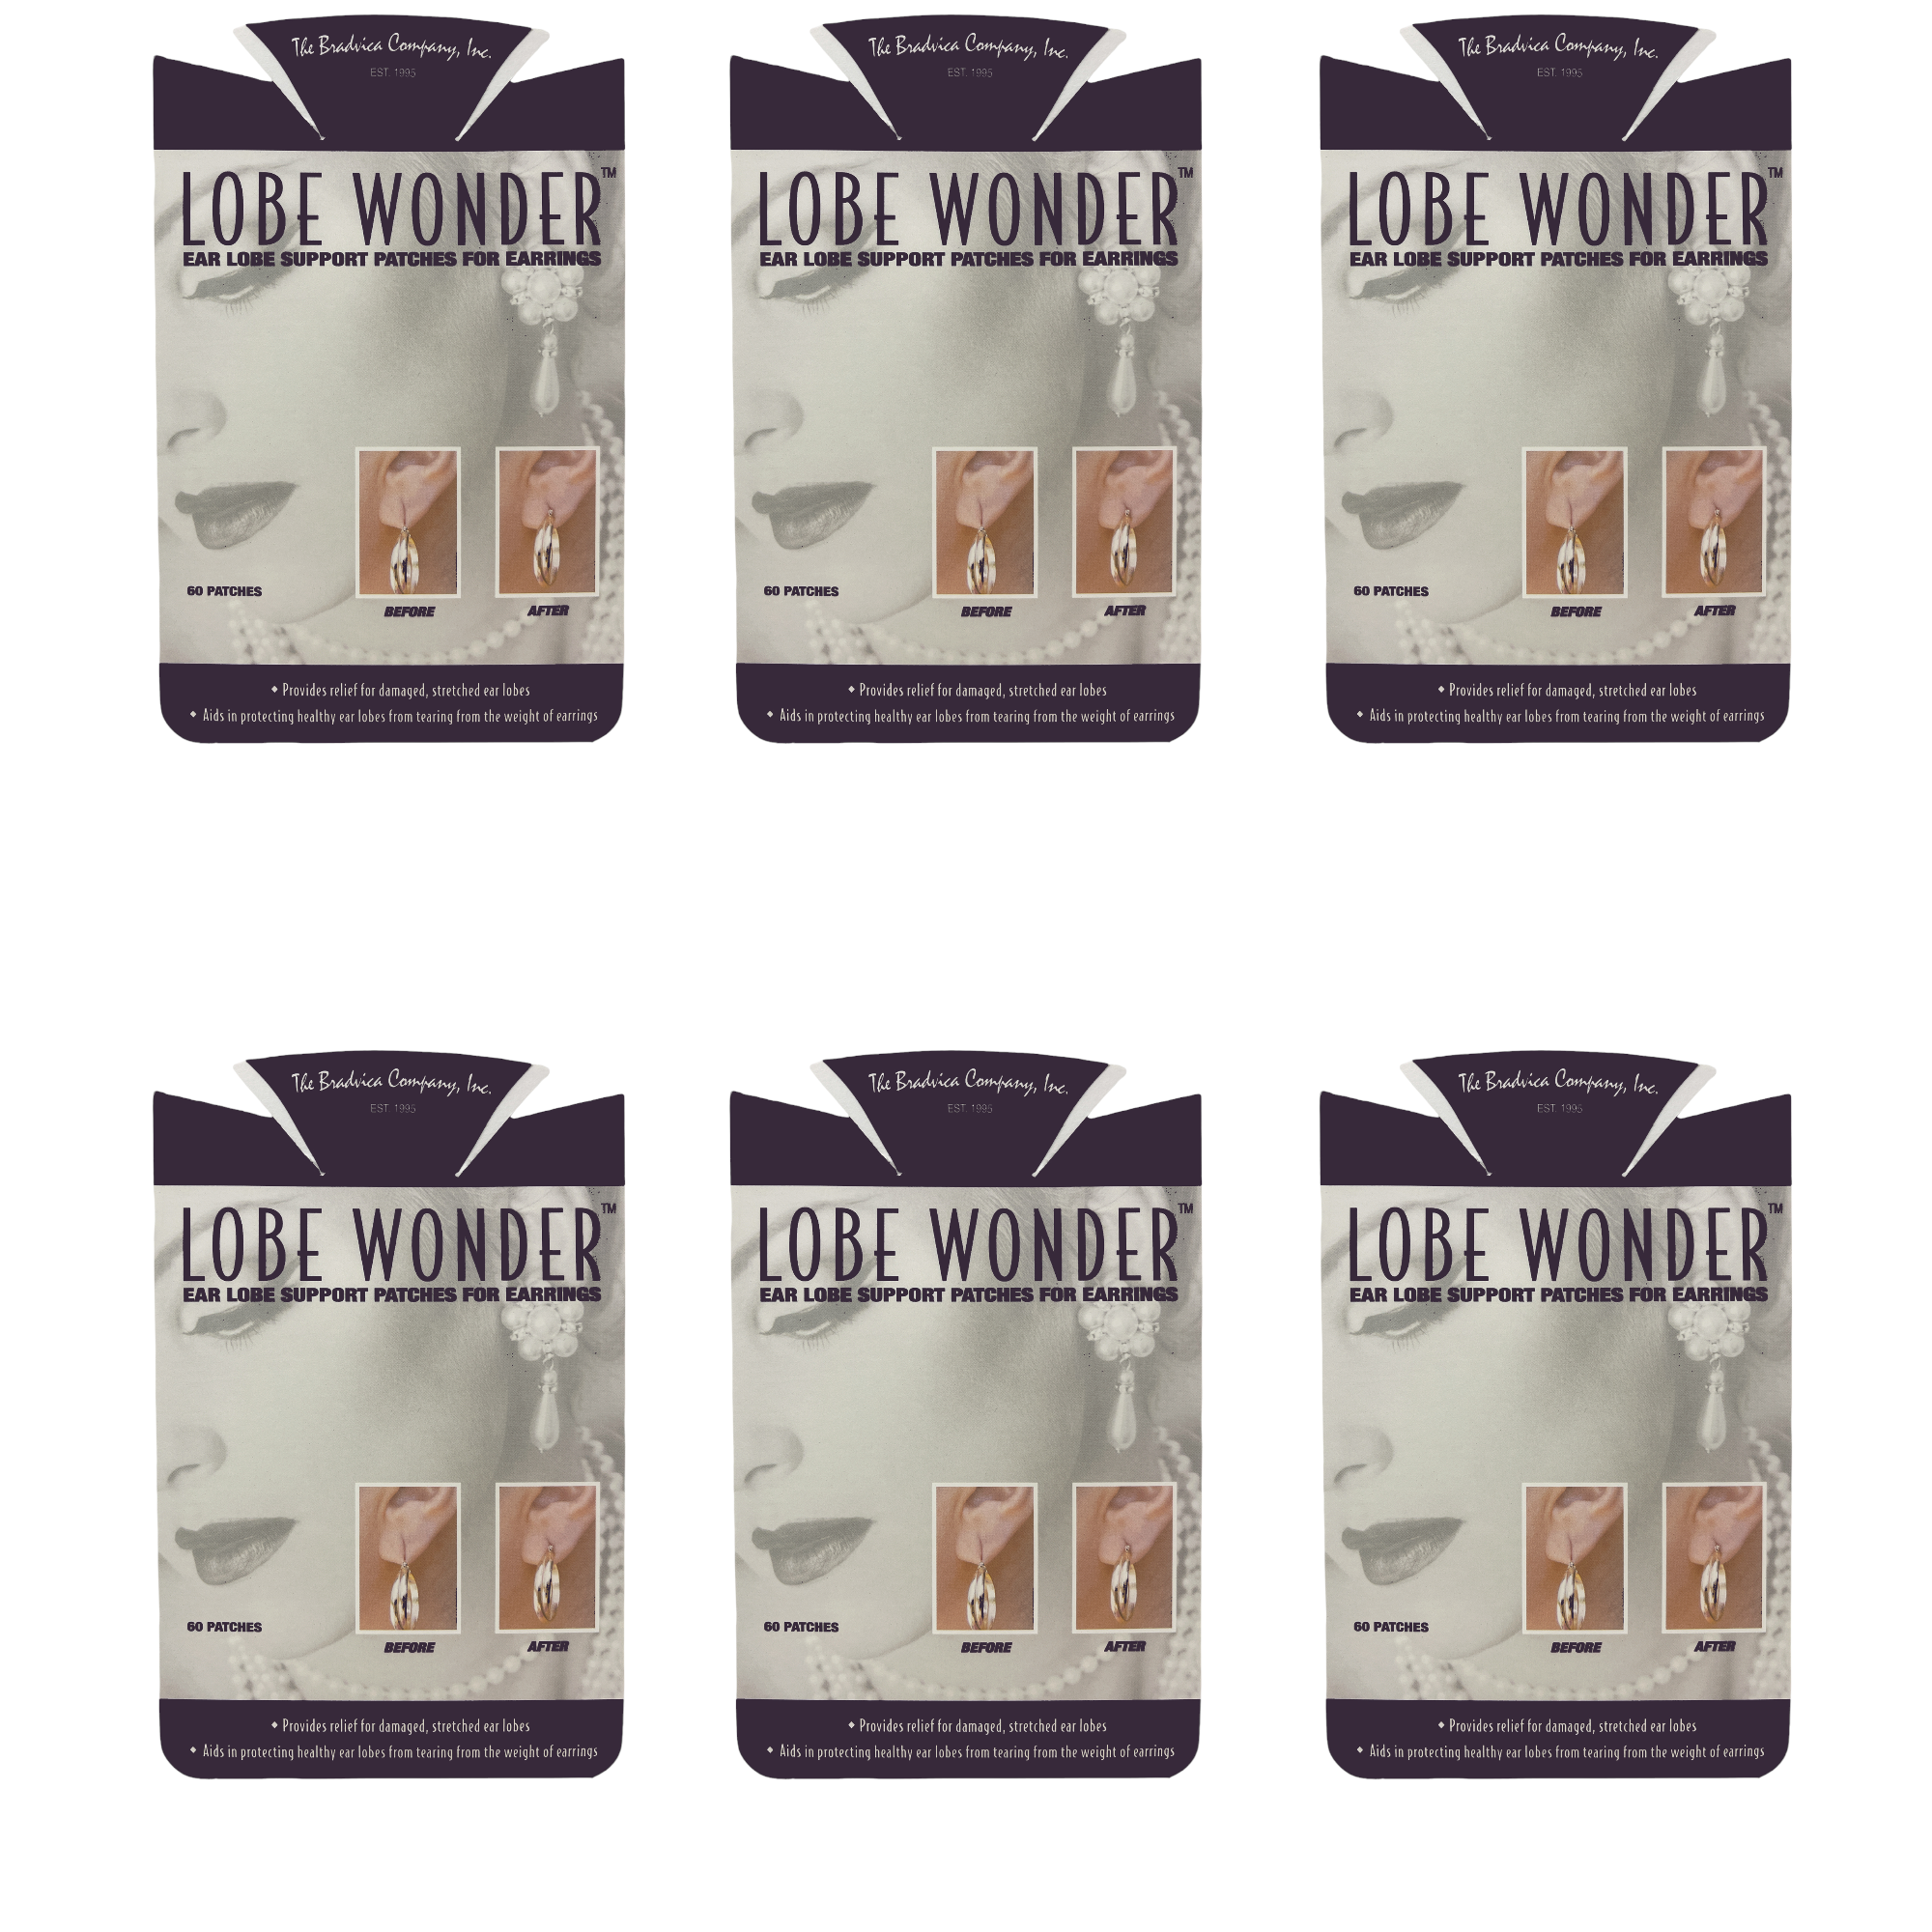 Lobe Wonder 240 Unisex Earring Support Patches Self Adhesive Oval For All  Age Groups - 4 Pack, 1 - Fry's Food Stores